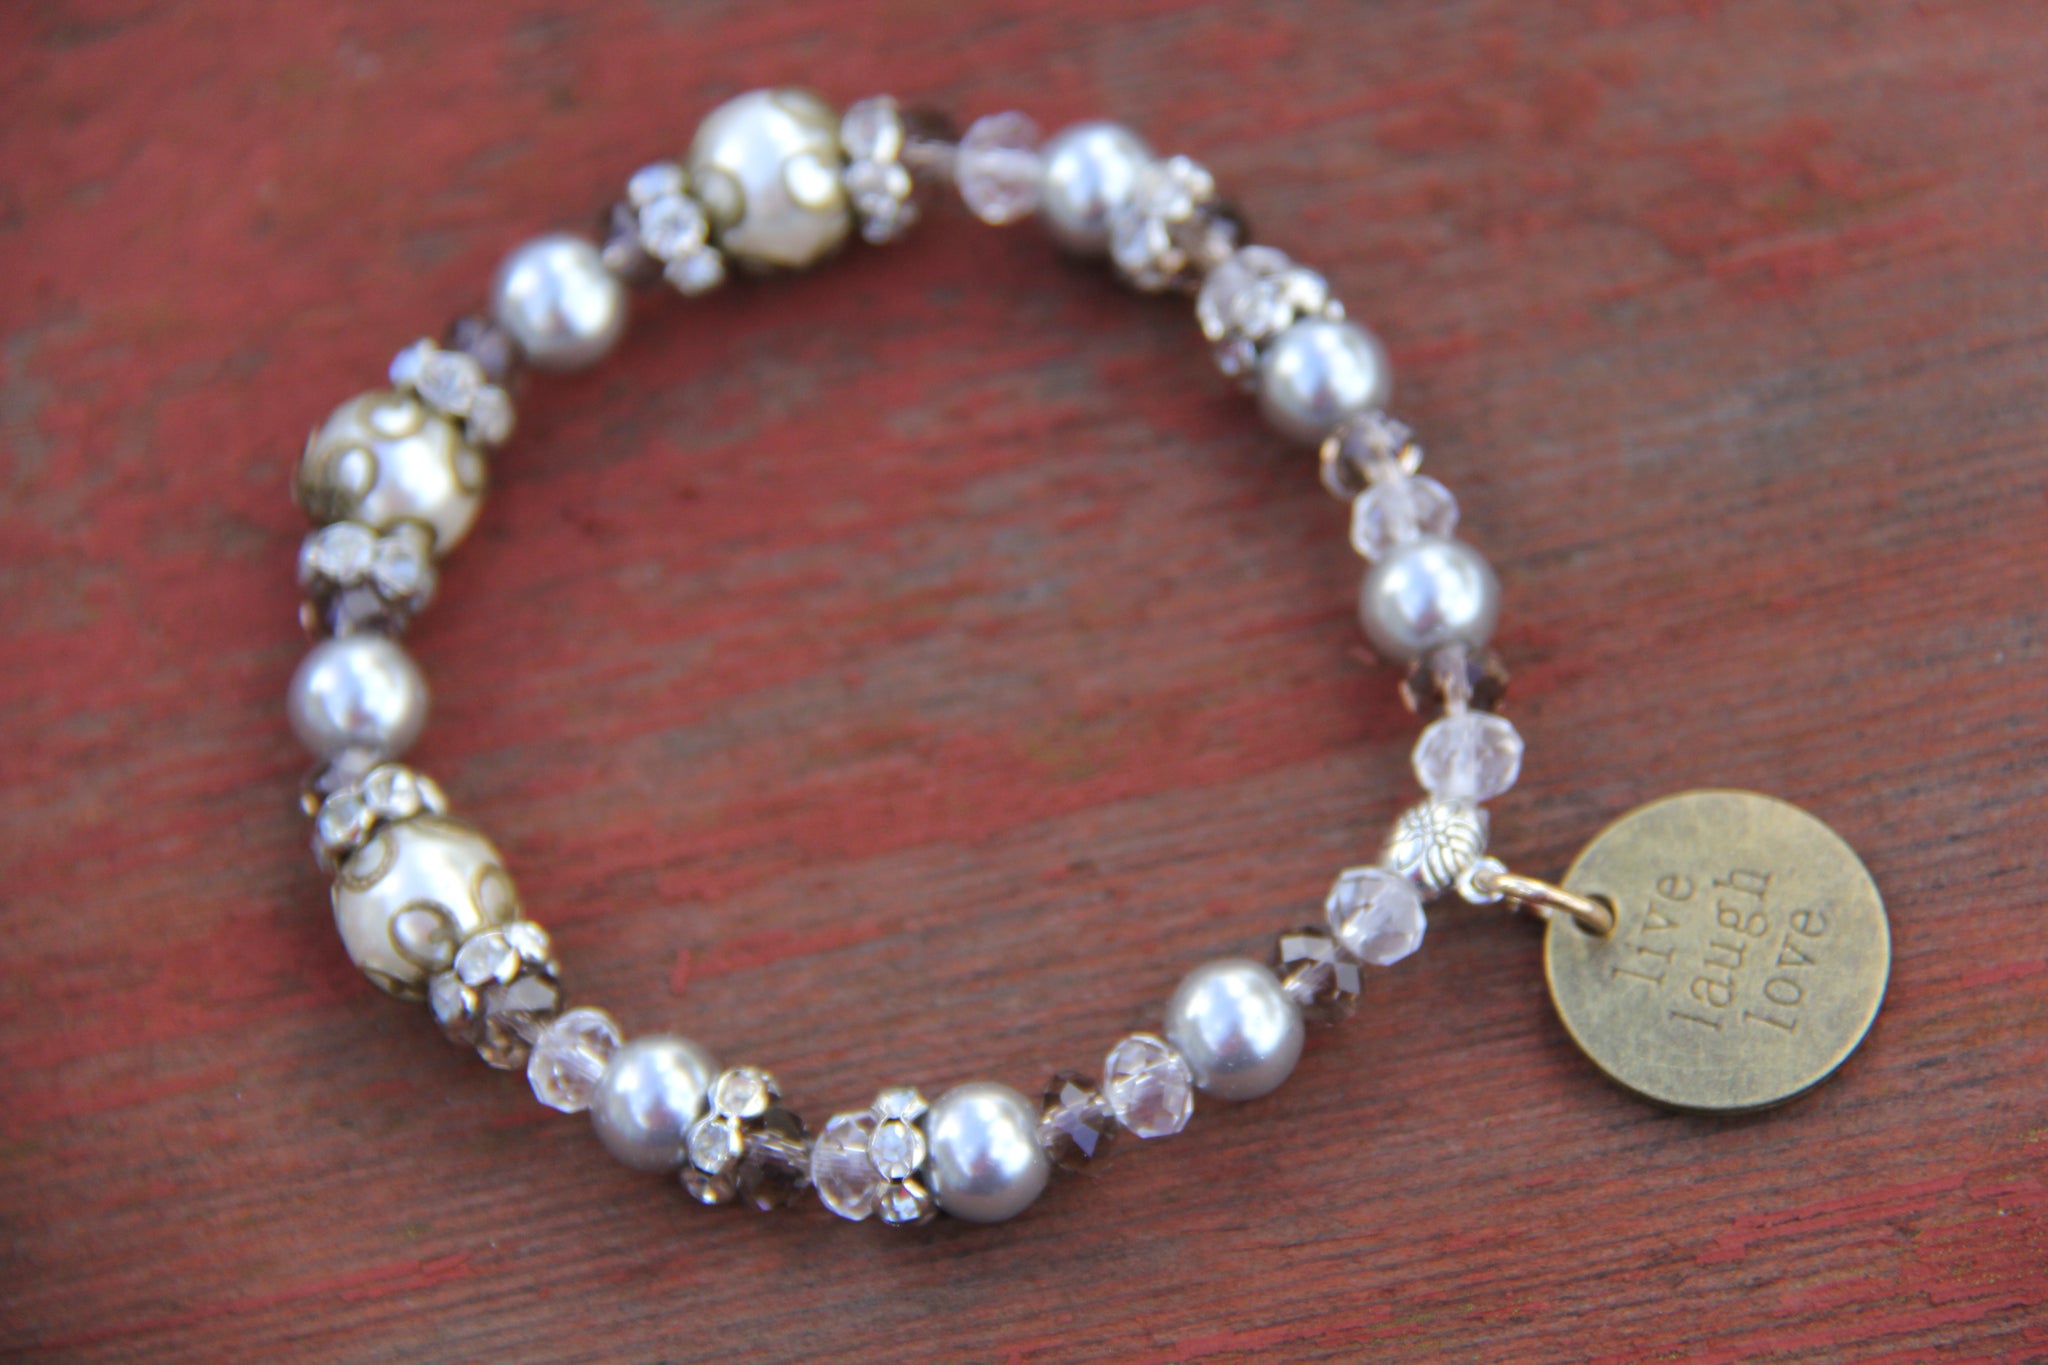 Bottle bracelet made with Grey glass beads with "live laugh love" charm